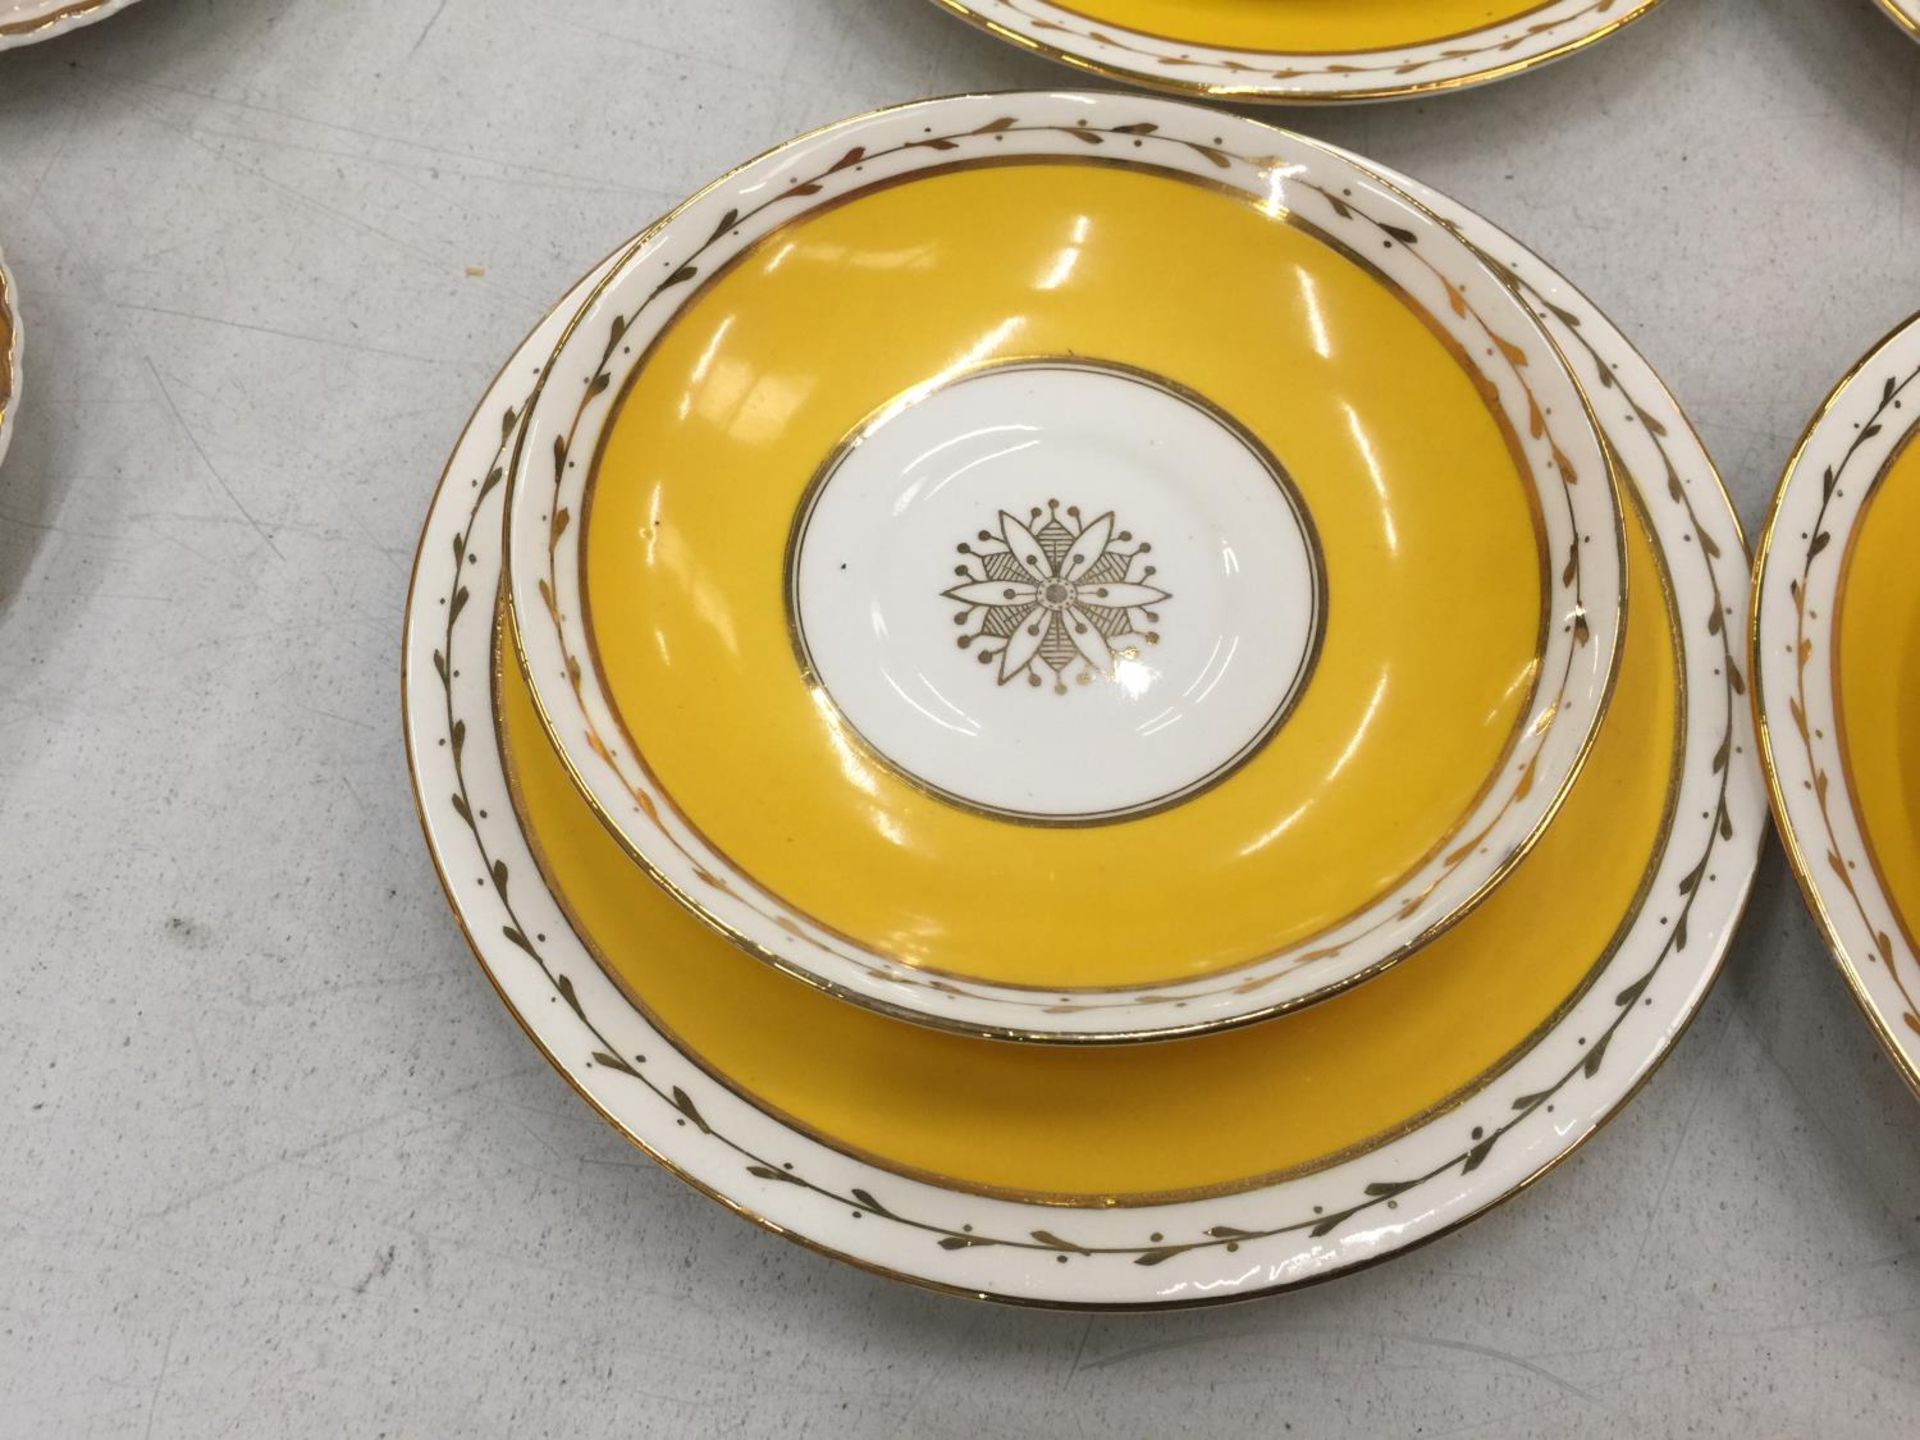 A QUANTITY OF WETLEY CHINA CUPS, SAUCERS AND PLATES IN A VIBRANT YELLOW AND GUILD COLOUR - Image 5 of 5